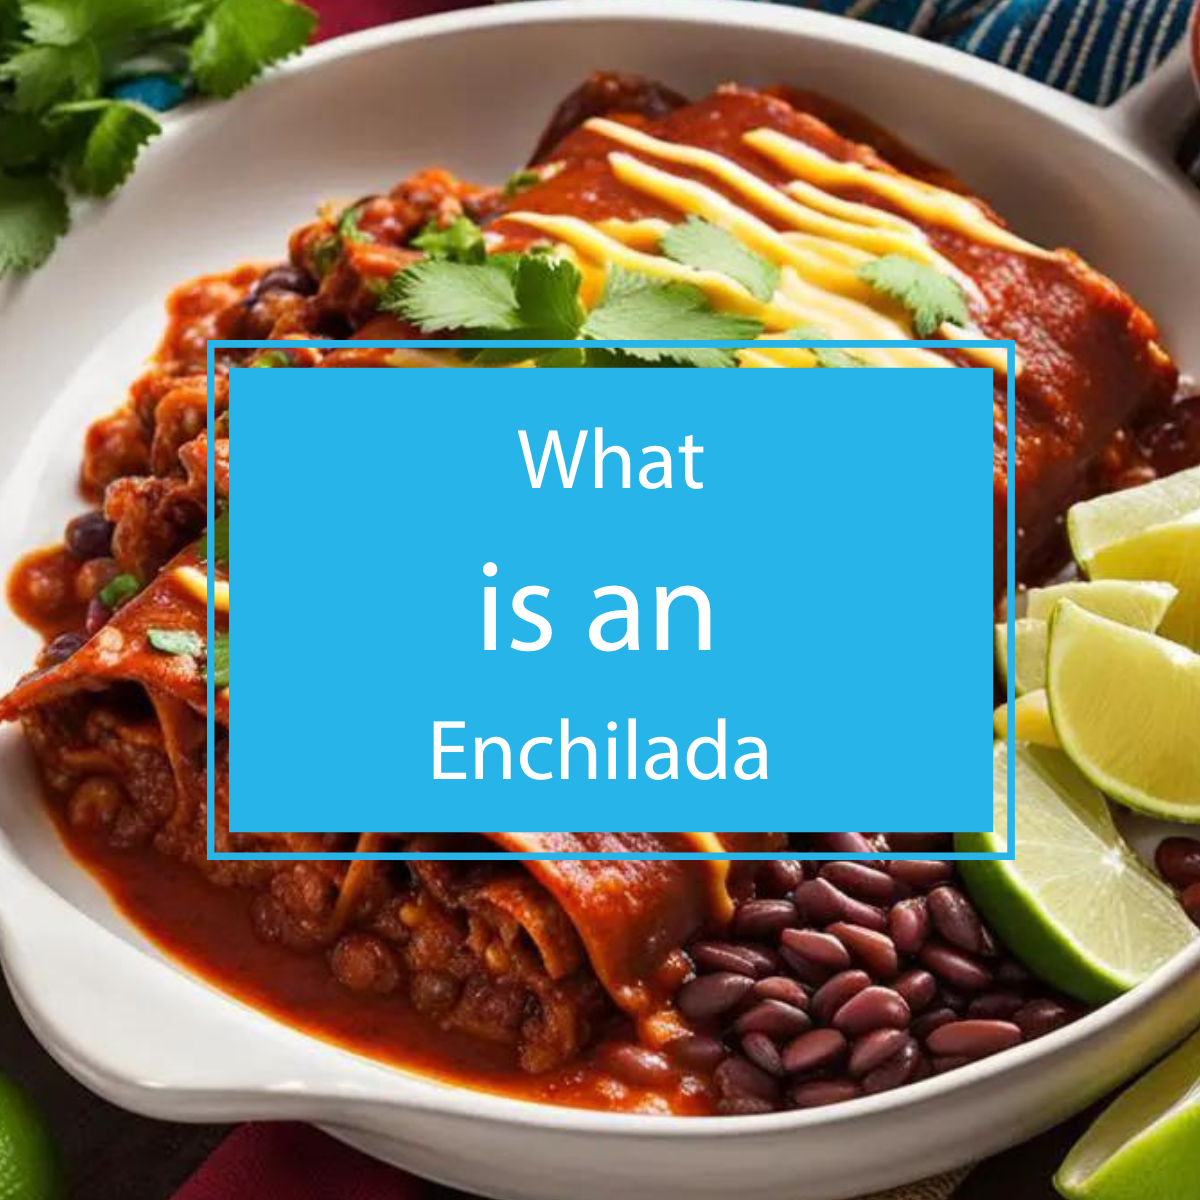 What is an Enchilada